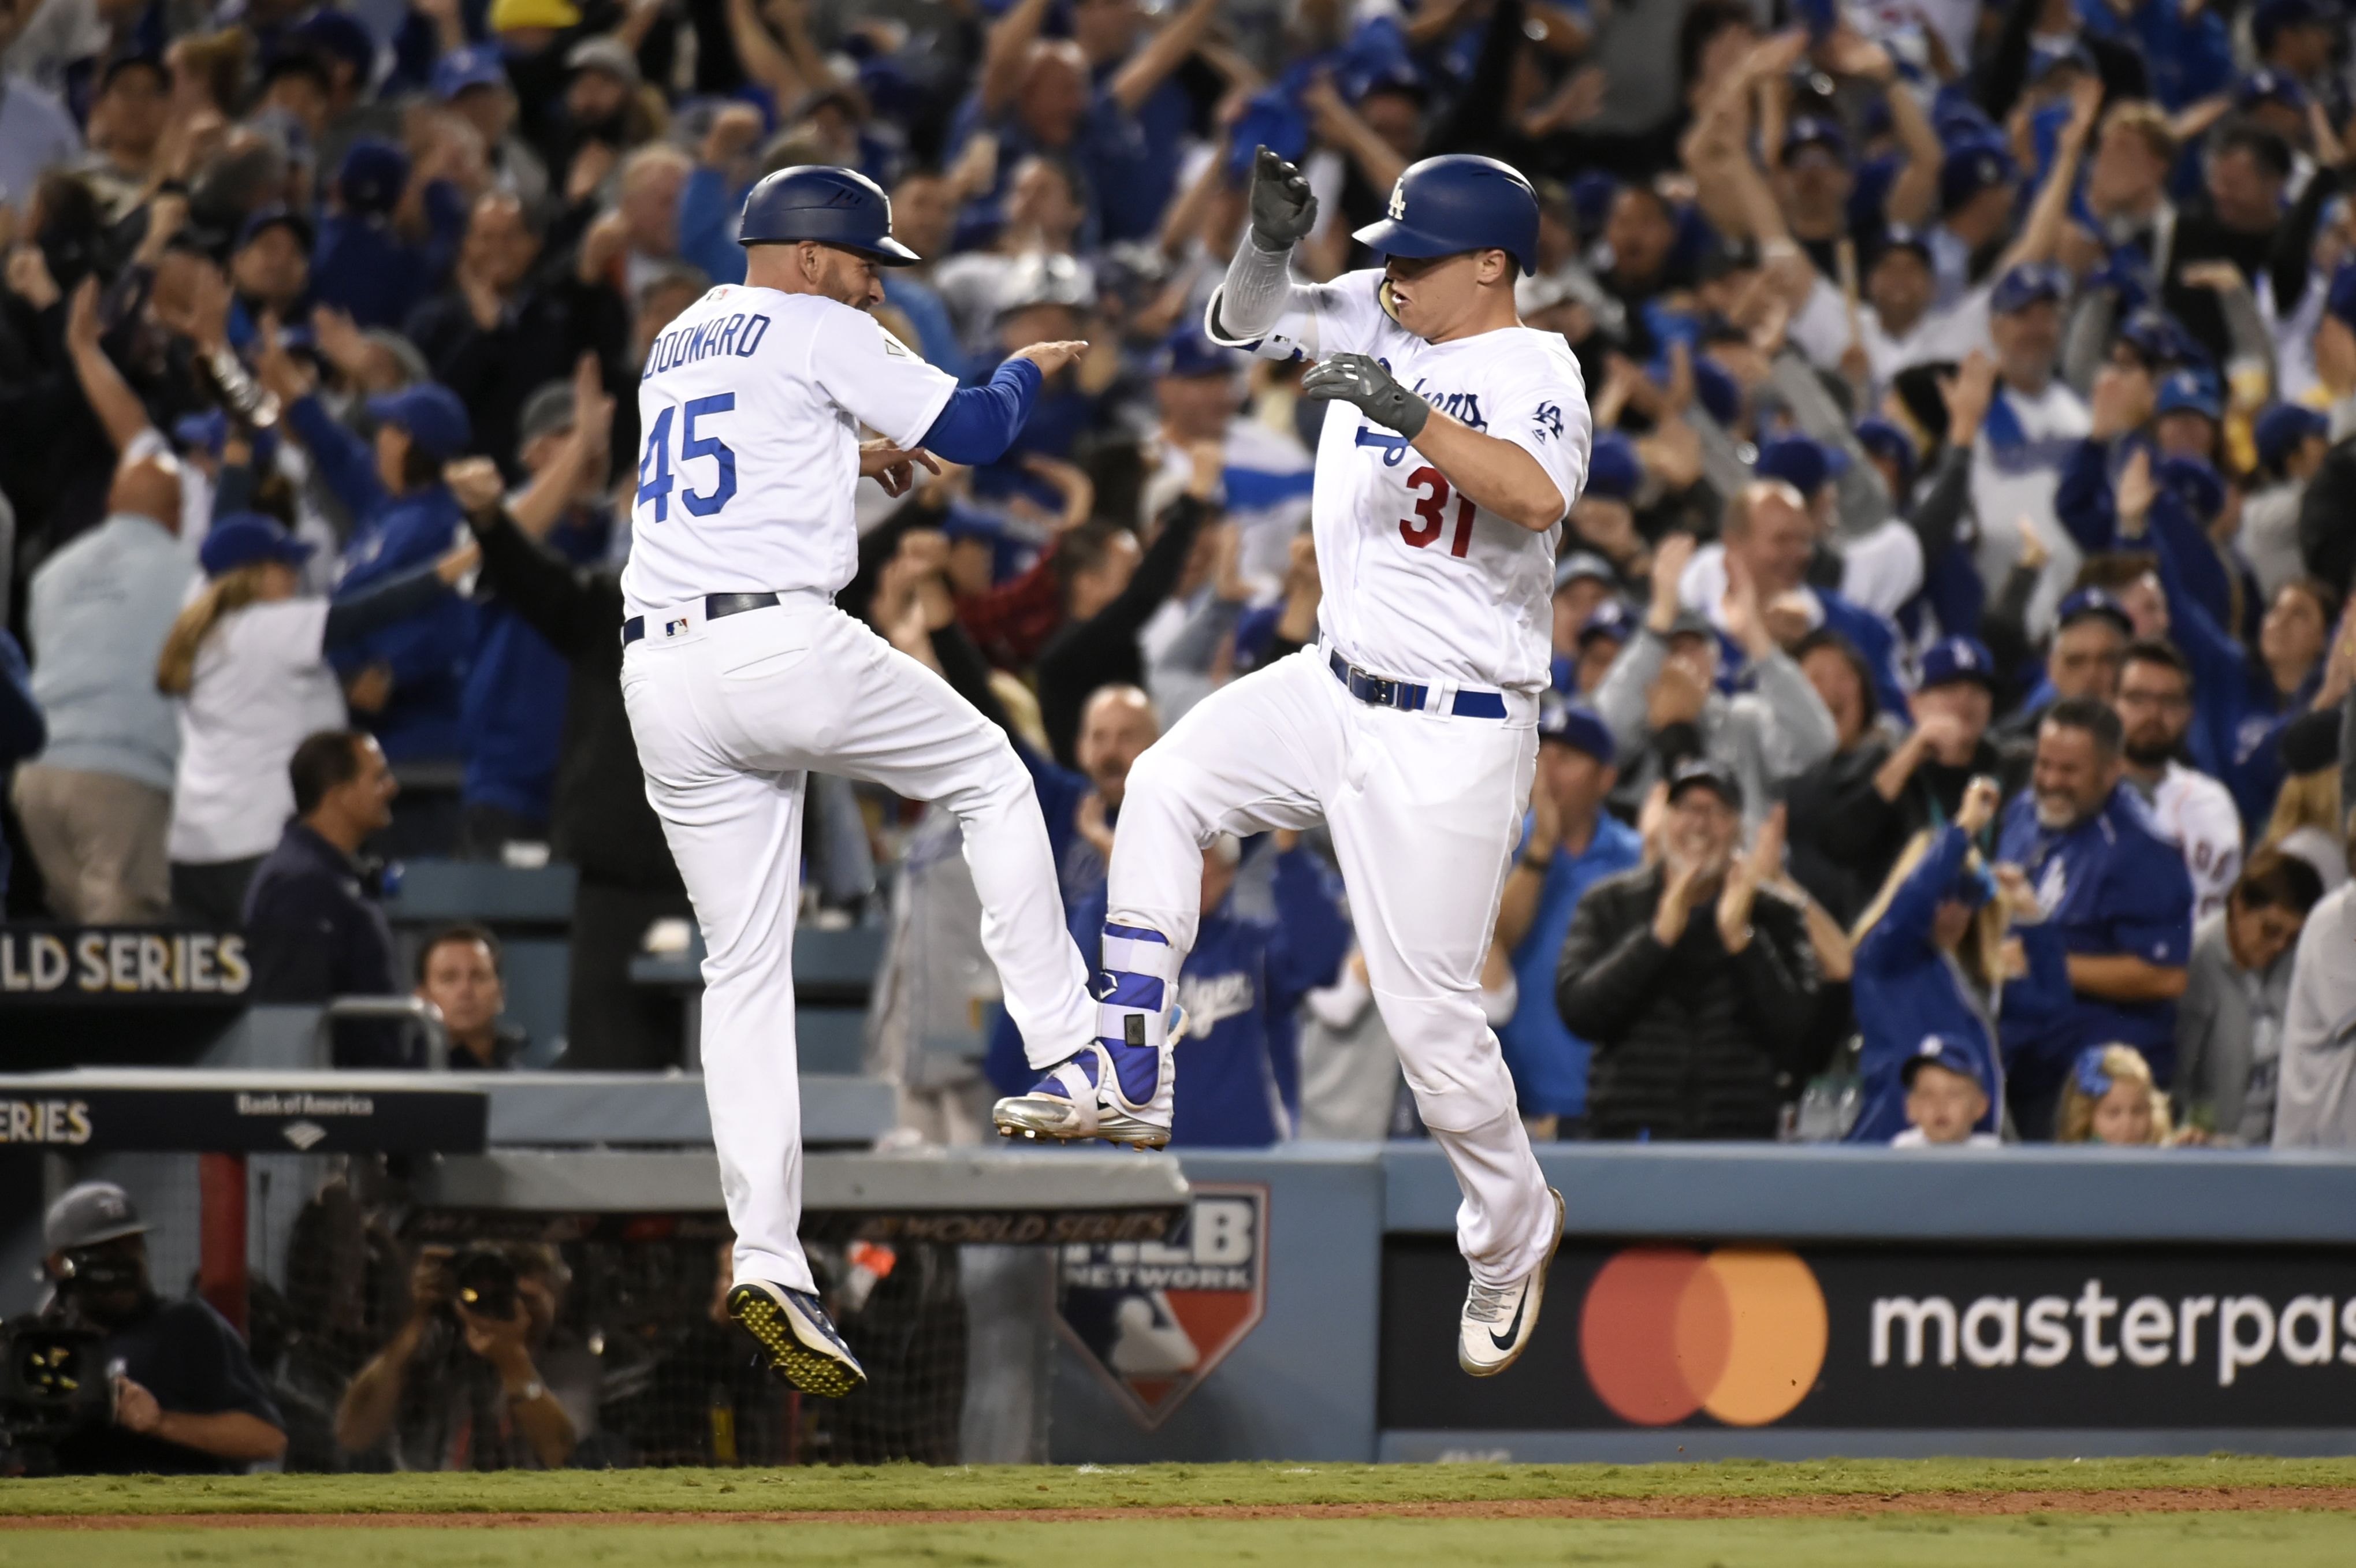 Dodgers down Astros 3-1 in World Series Game 1